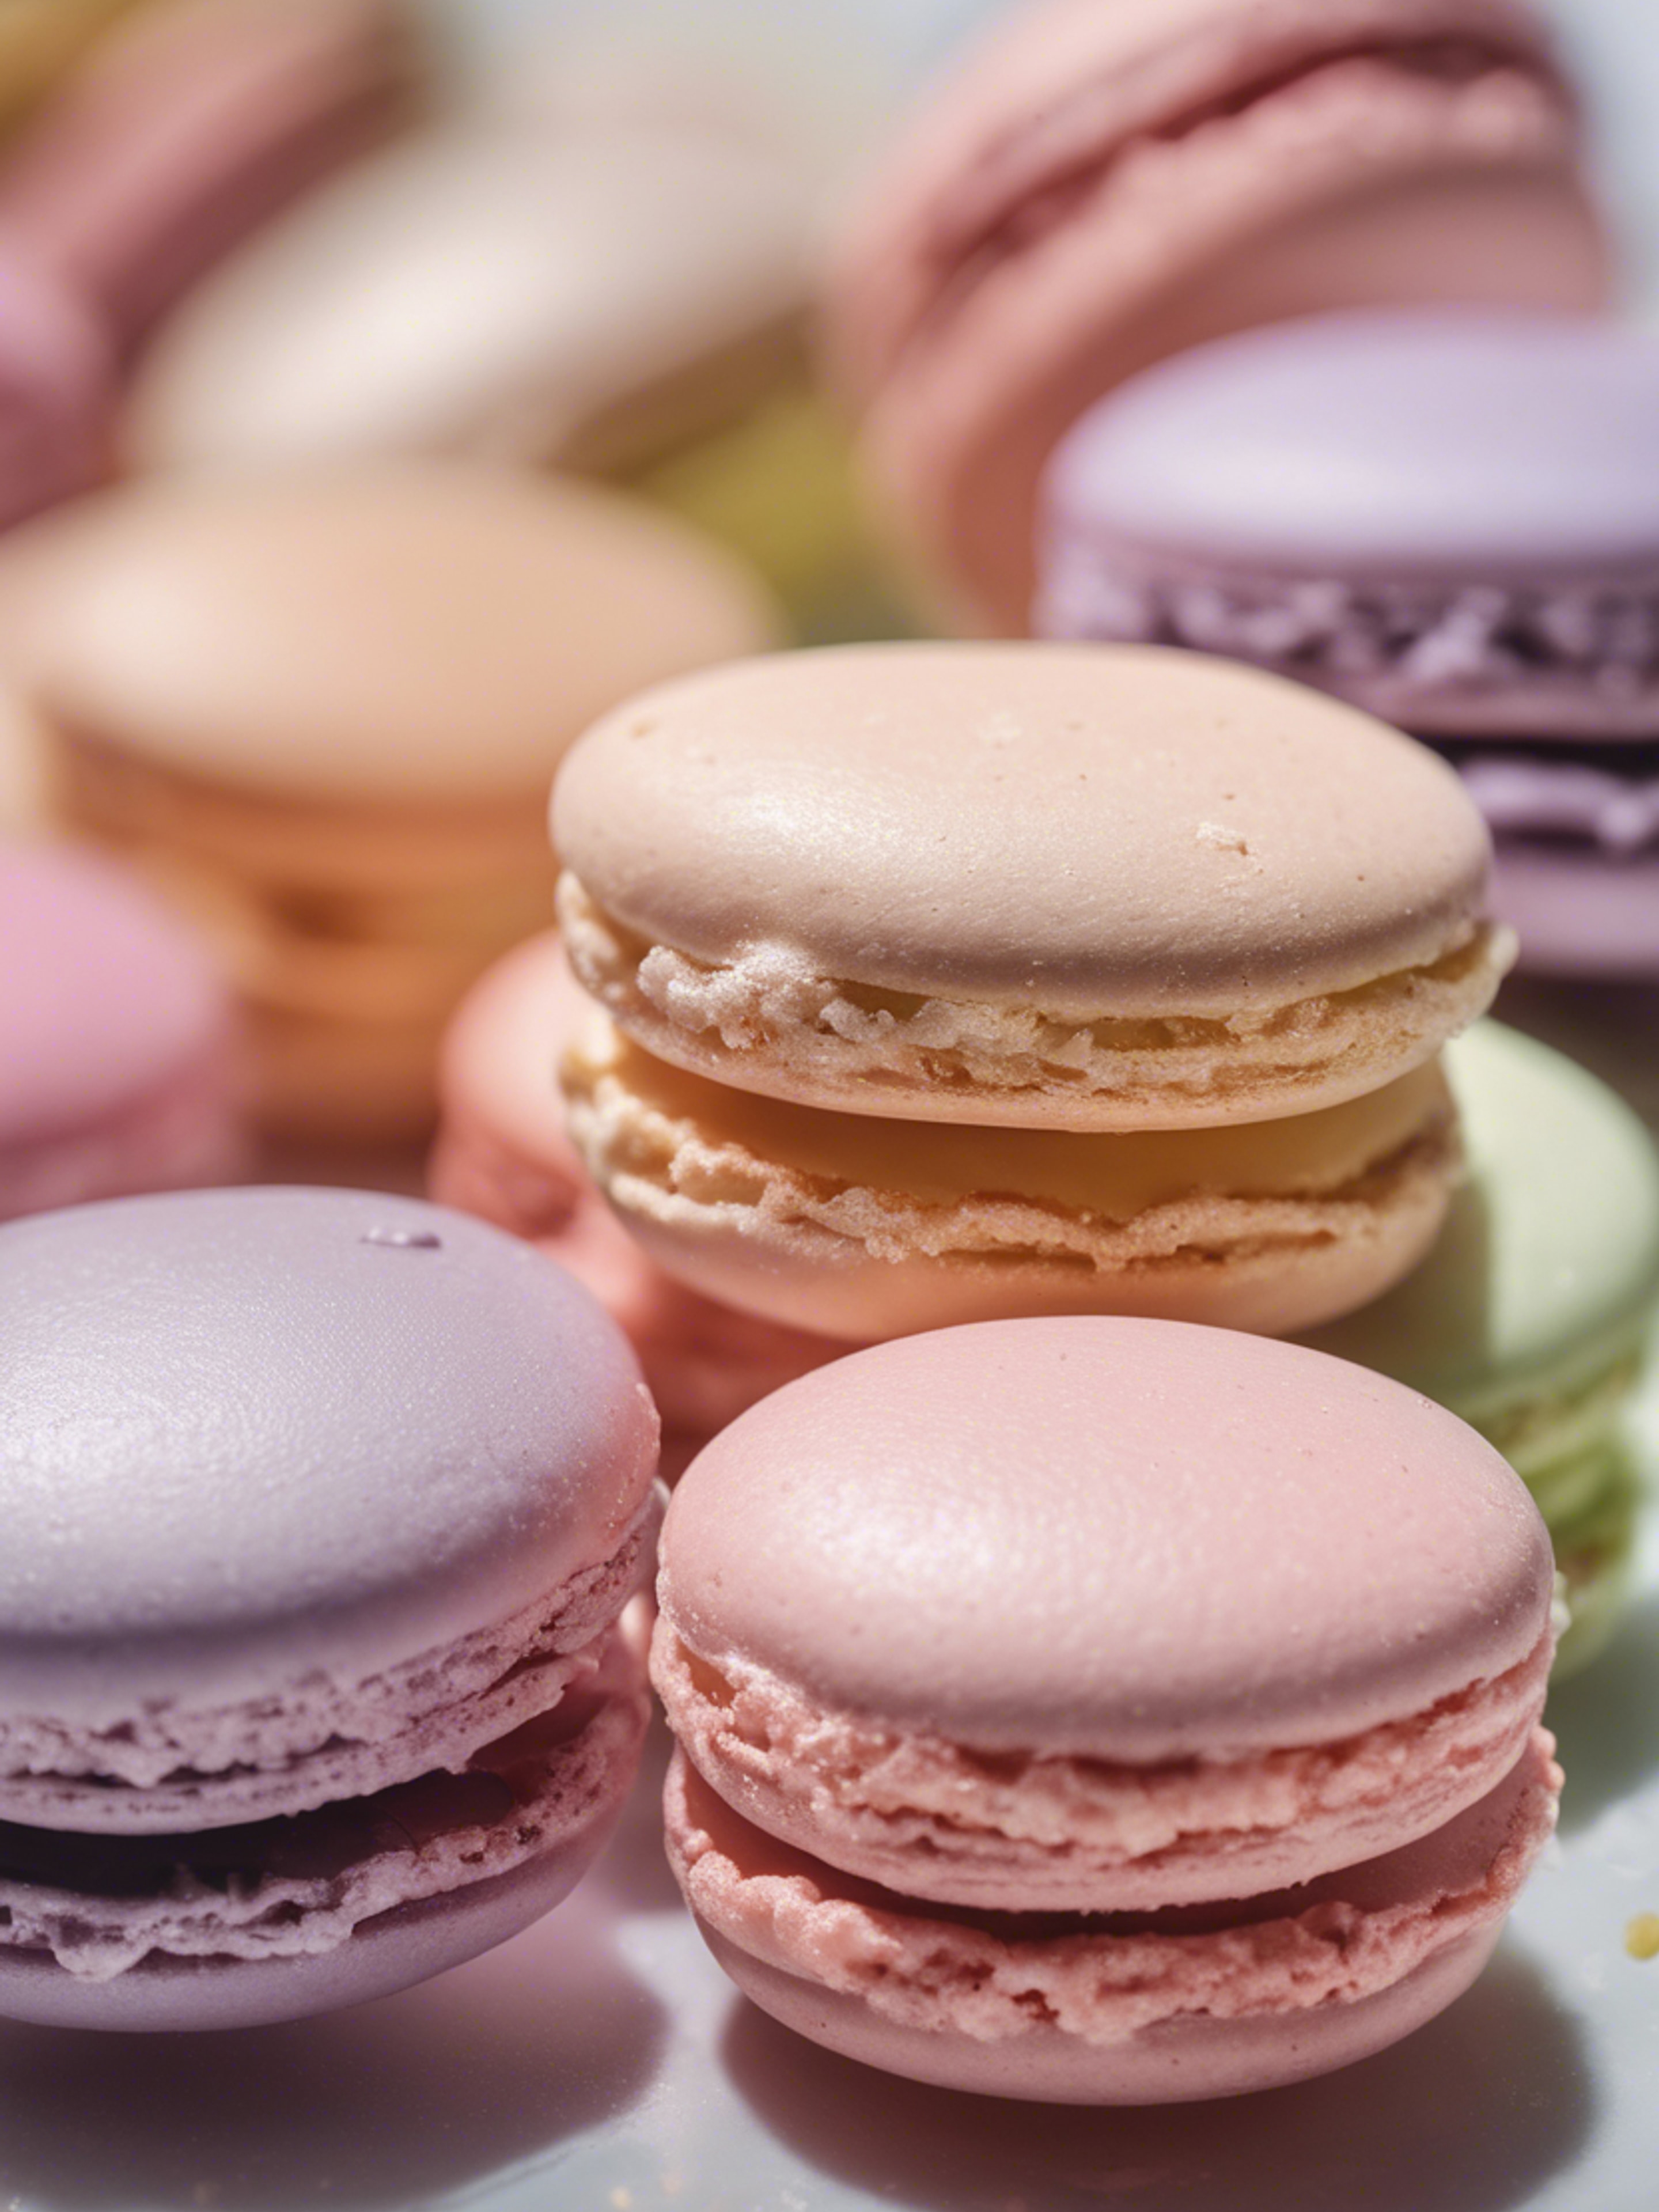 A close-up view of a cool pastel colored macaron making process. Sfondo[347d58695ee94000a1fc]